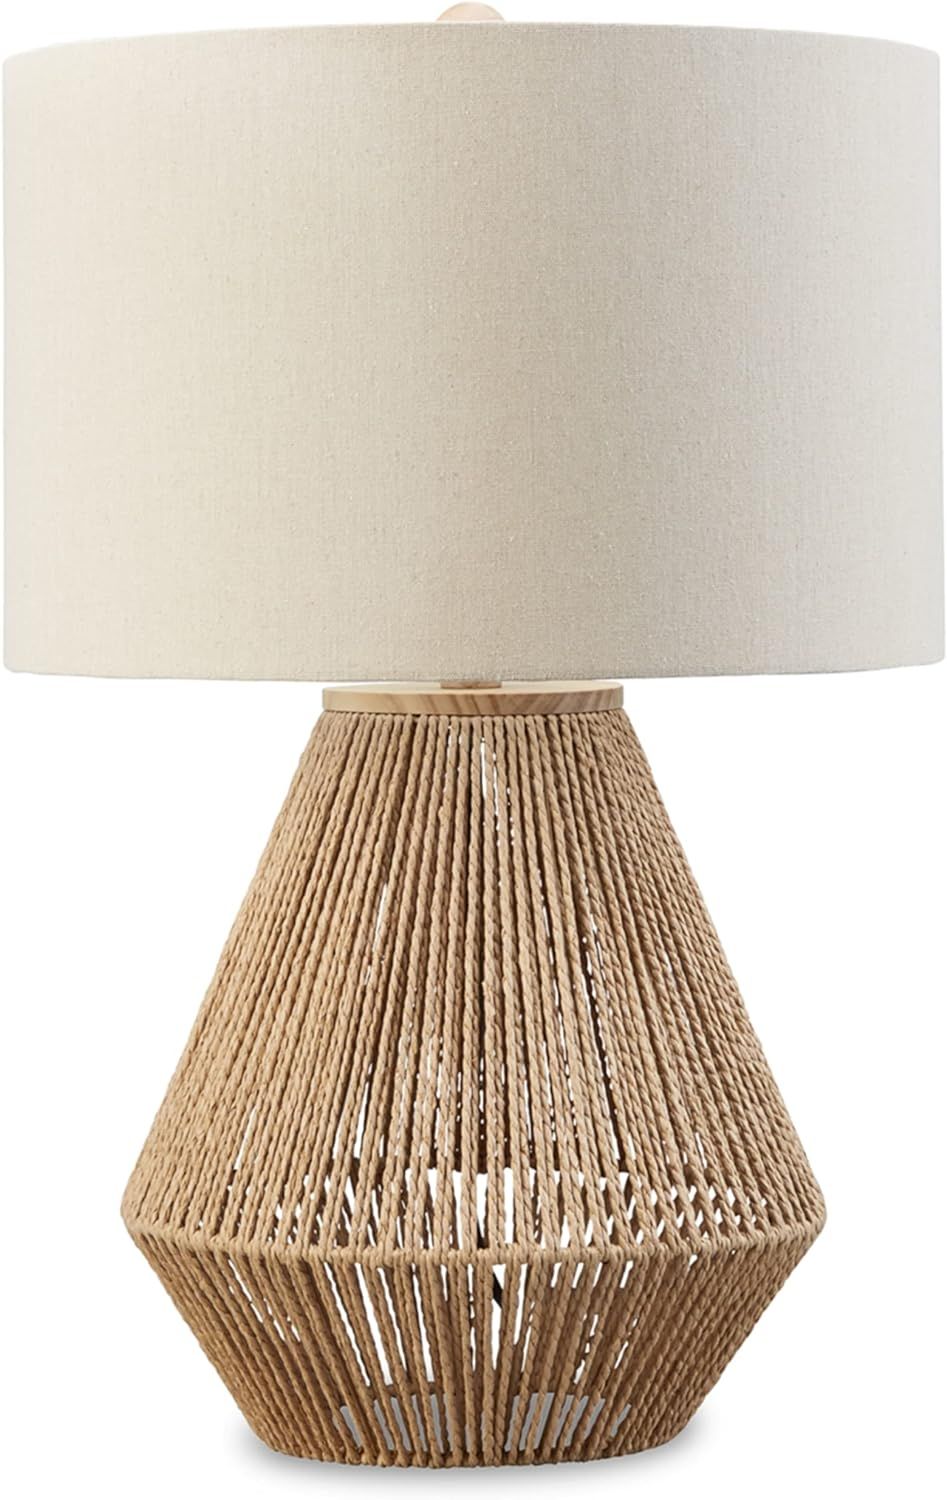 Signature Design by Ashley Clayman Bohemian 23.5" Paper Rope and Wood Table Lamp, Light Brown | Amazon (US)